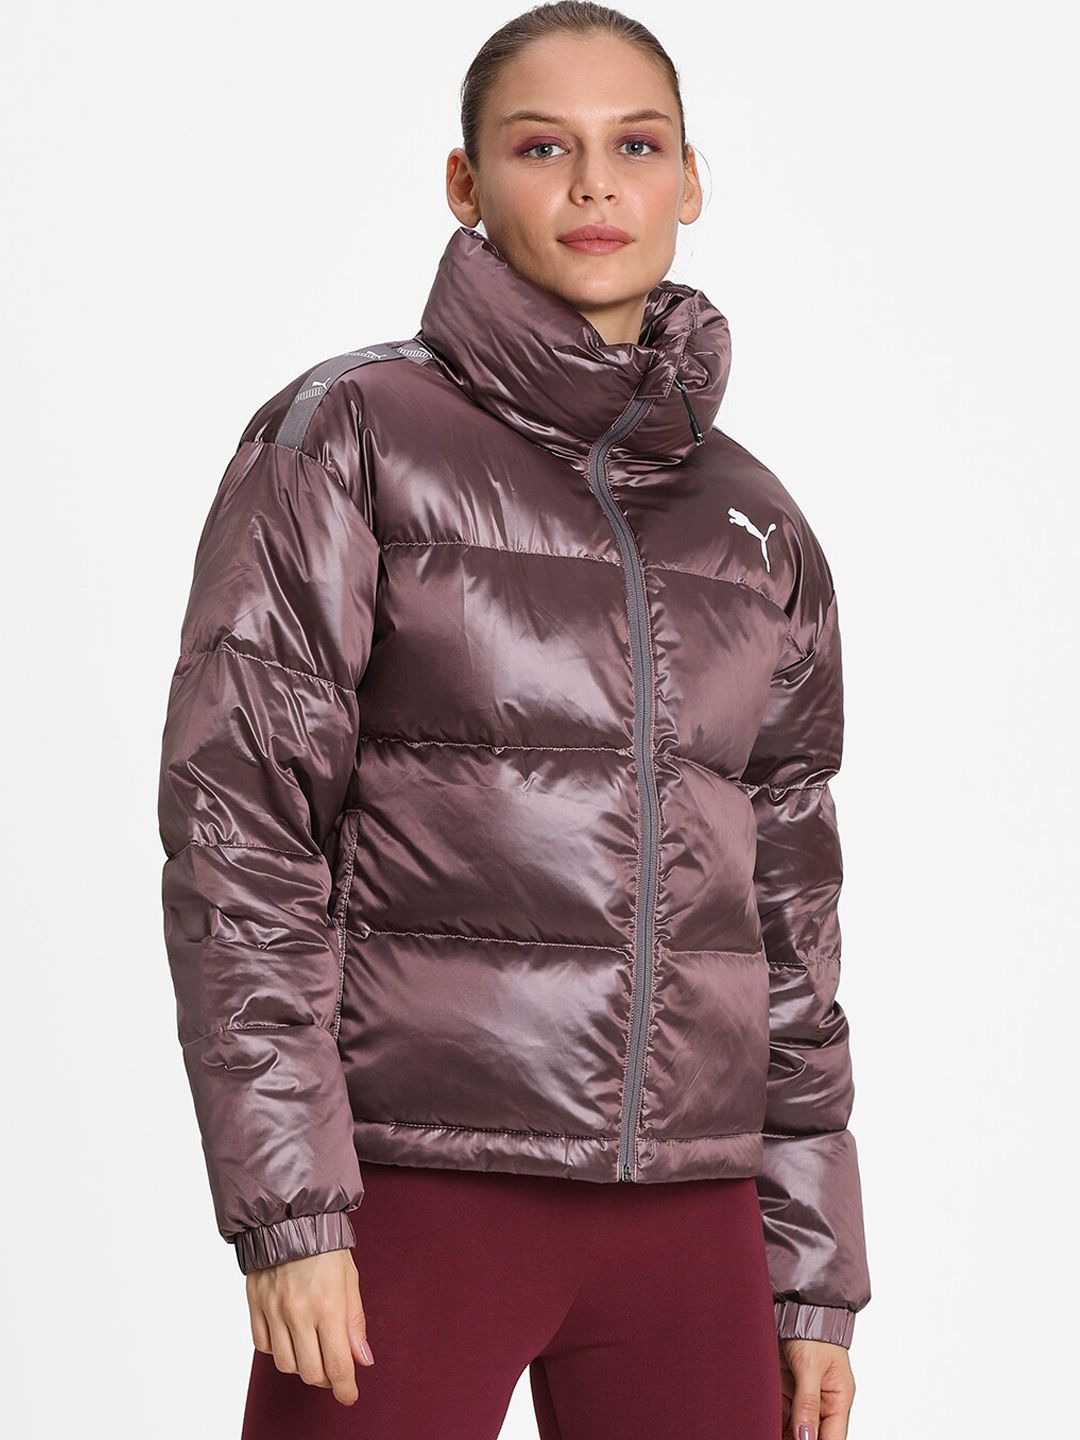 Puma Women Pink Quilted Jacket Price in India